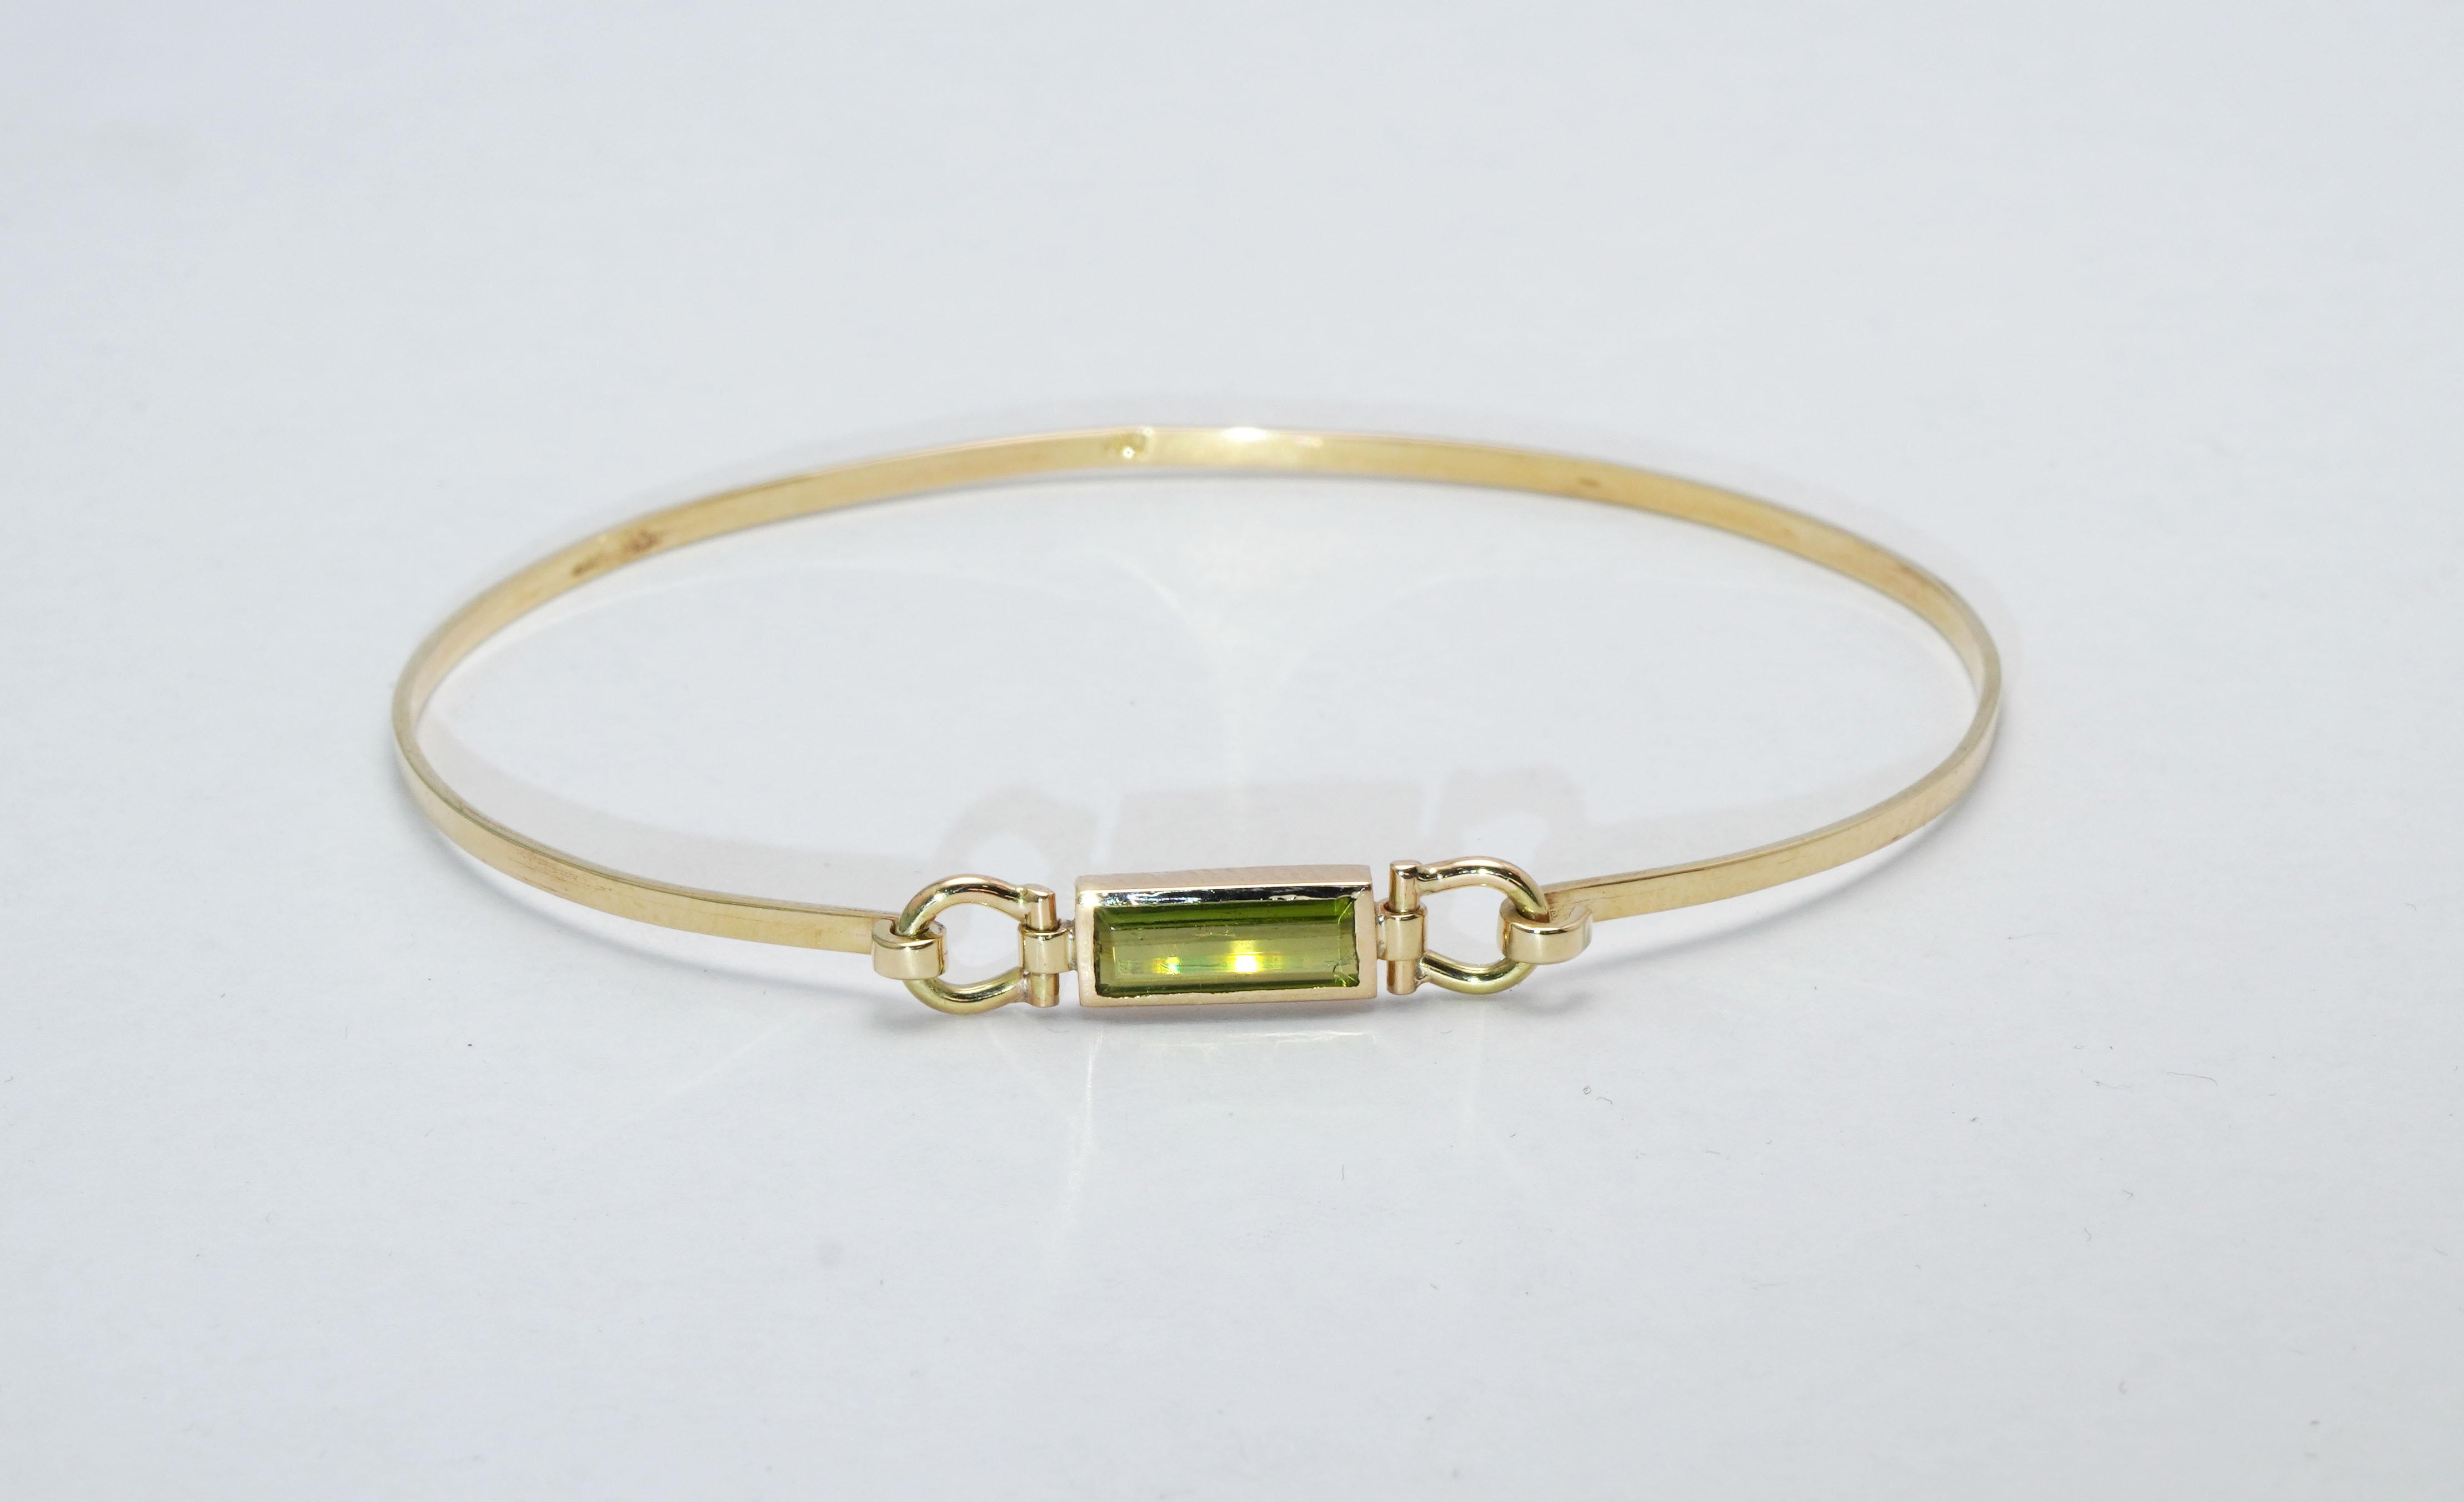 A magnificent handmade 14 ct. Yellow Gold Bracelet set with Green Tourmaline.
Gold color: Yellow
Dimensions: 62mm. x 52mm. 
Total weight: 4.27 grams 

Set with:
- Green Tourmaline
Cut: Baguette
Weight:  0.83 Carat
Color: Green